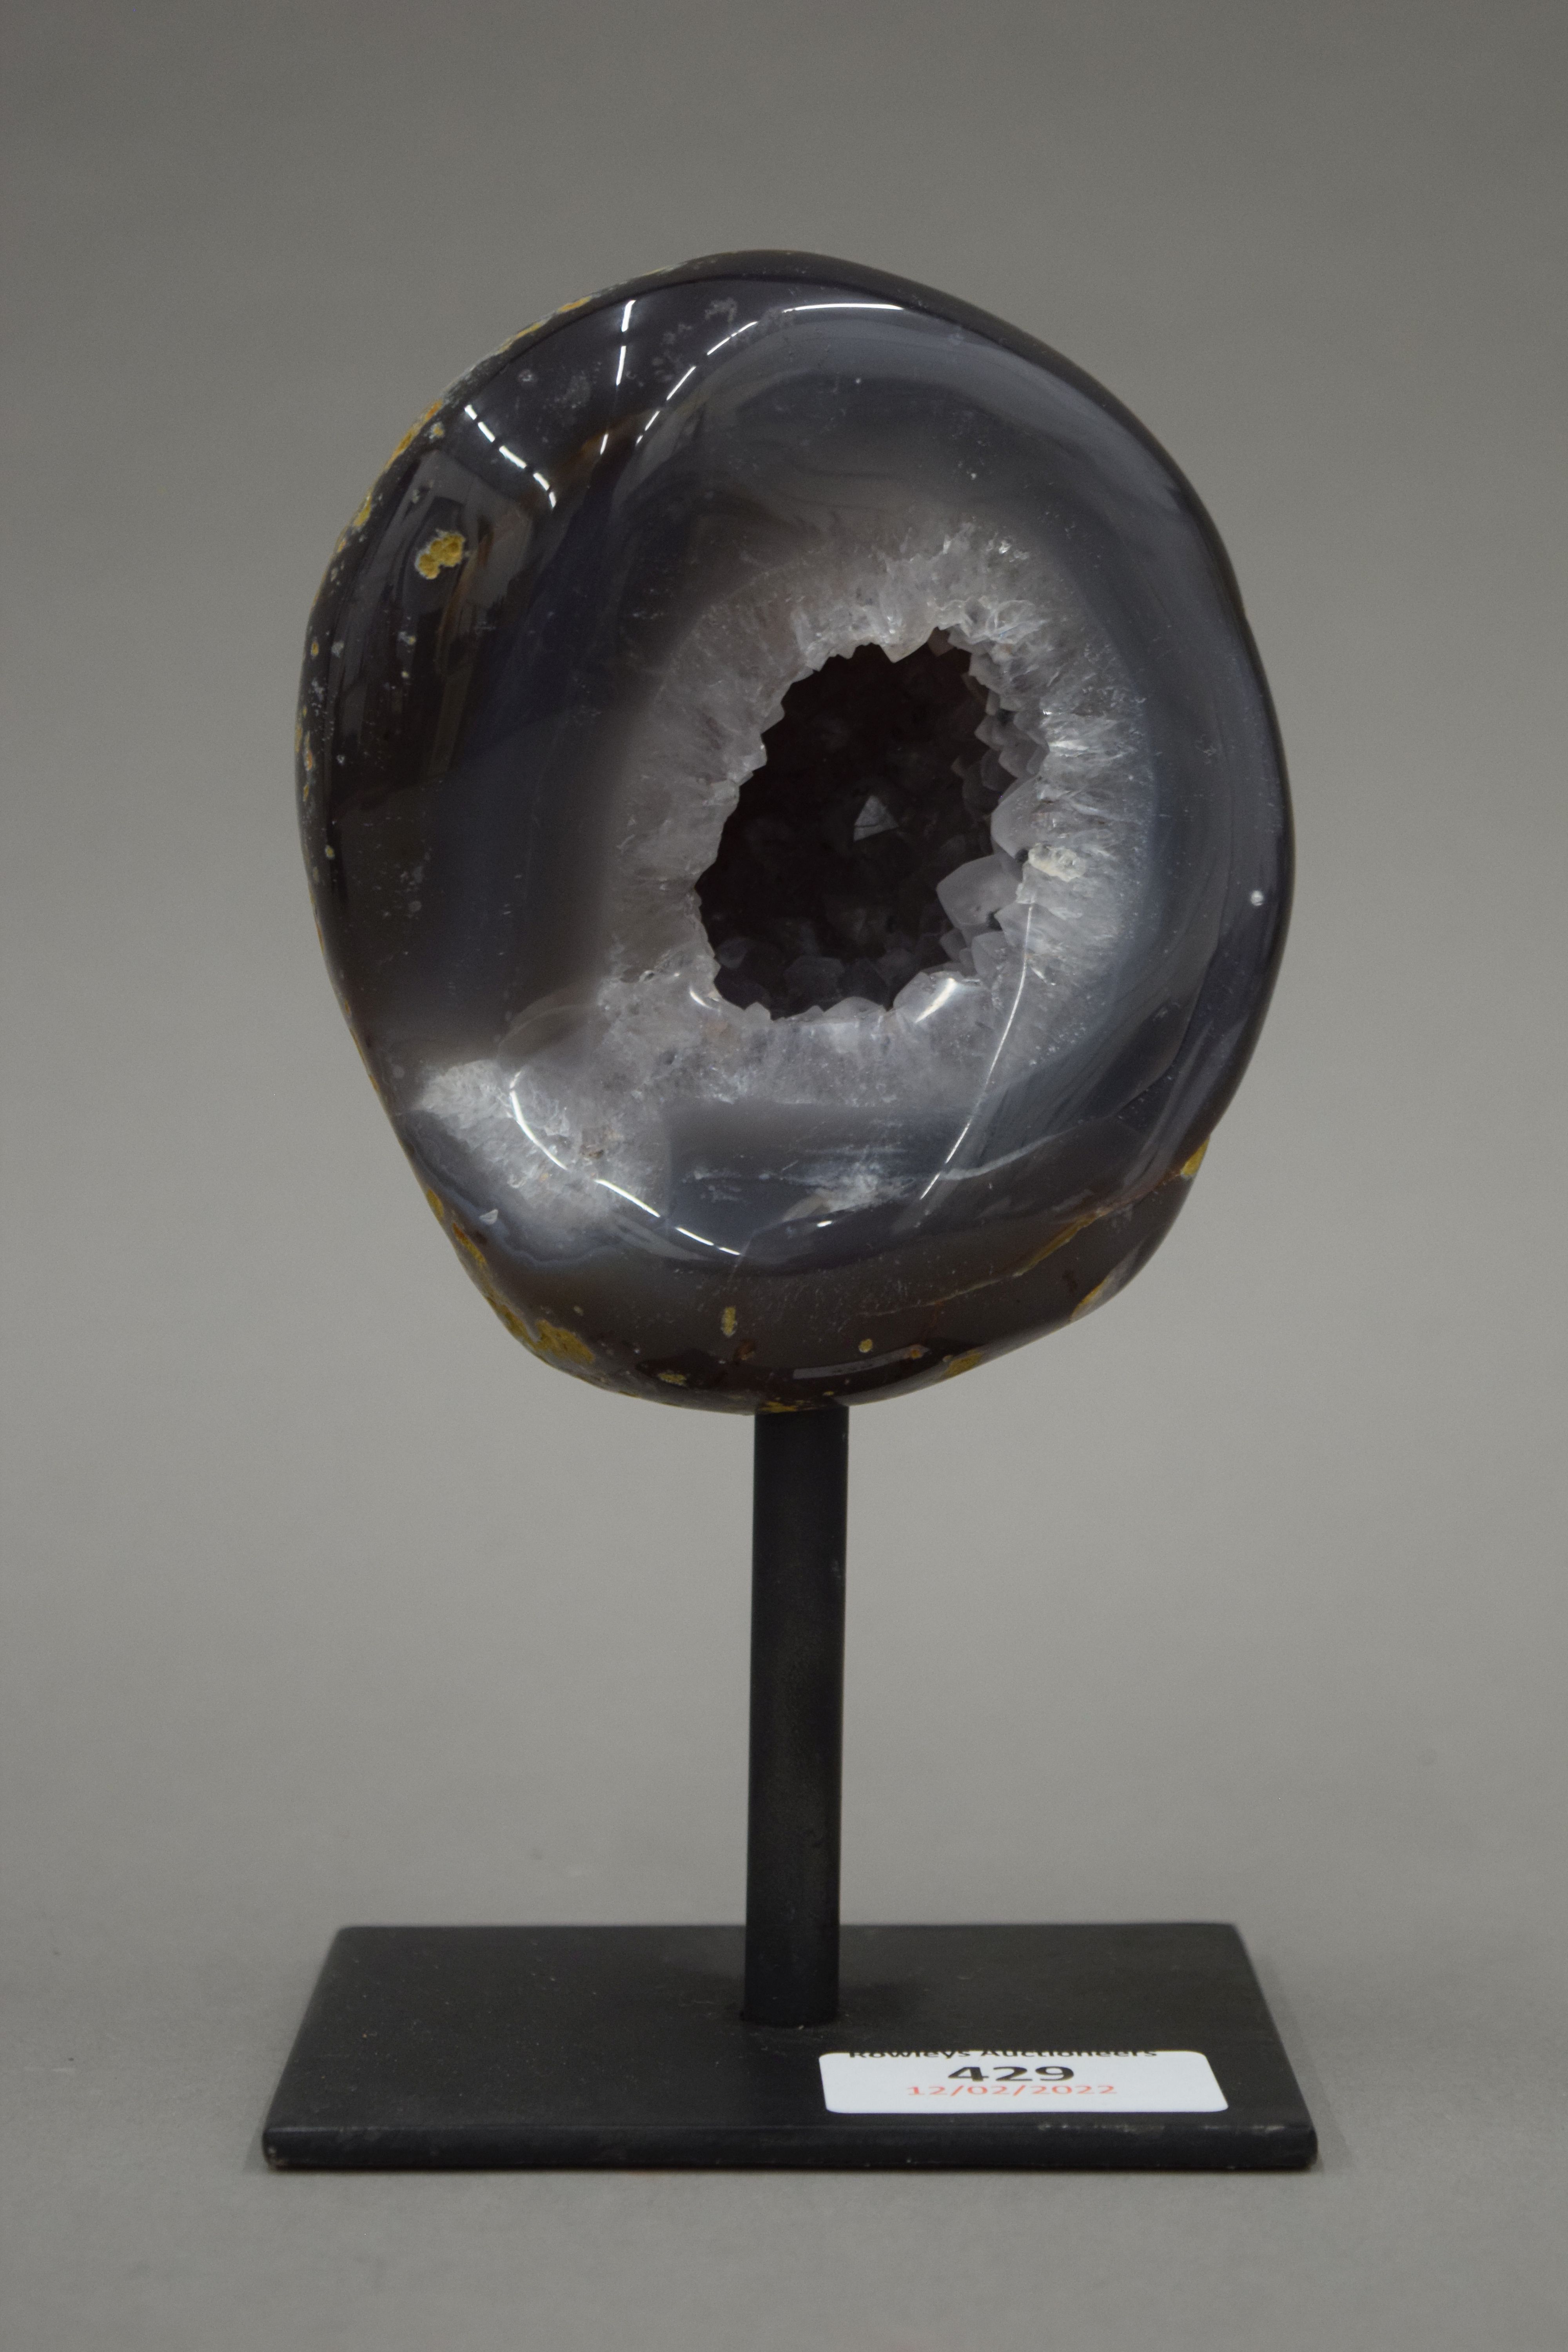 A small mineral geode on presentation stand. 17 cm high overall.